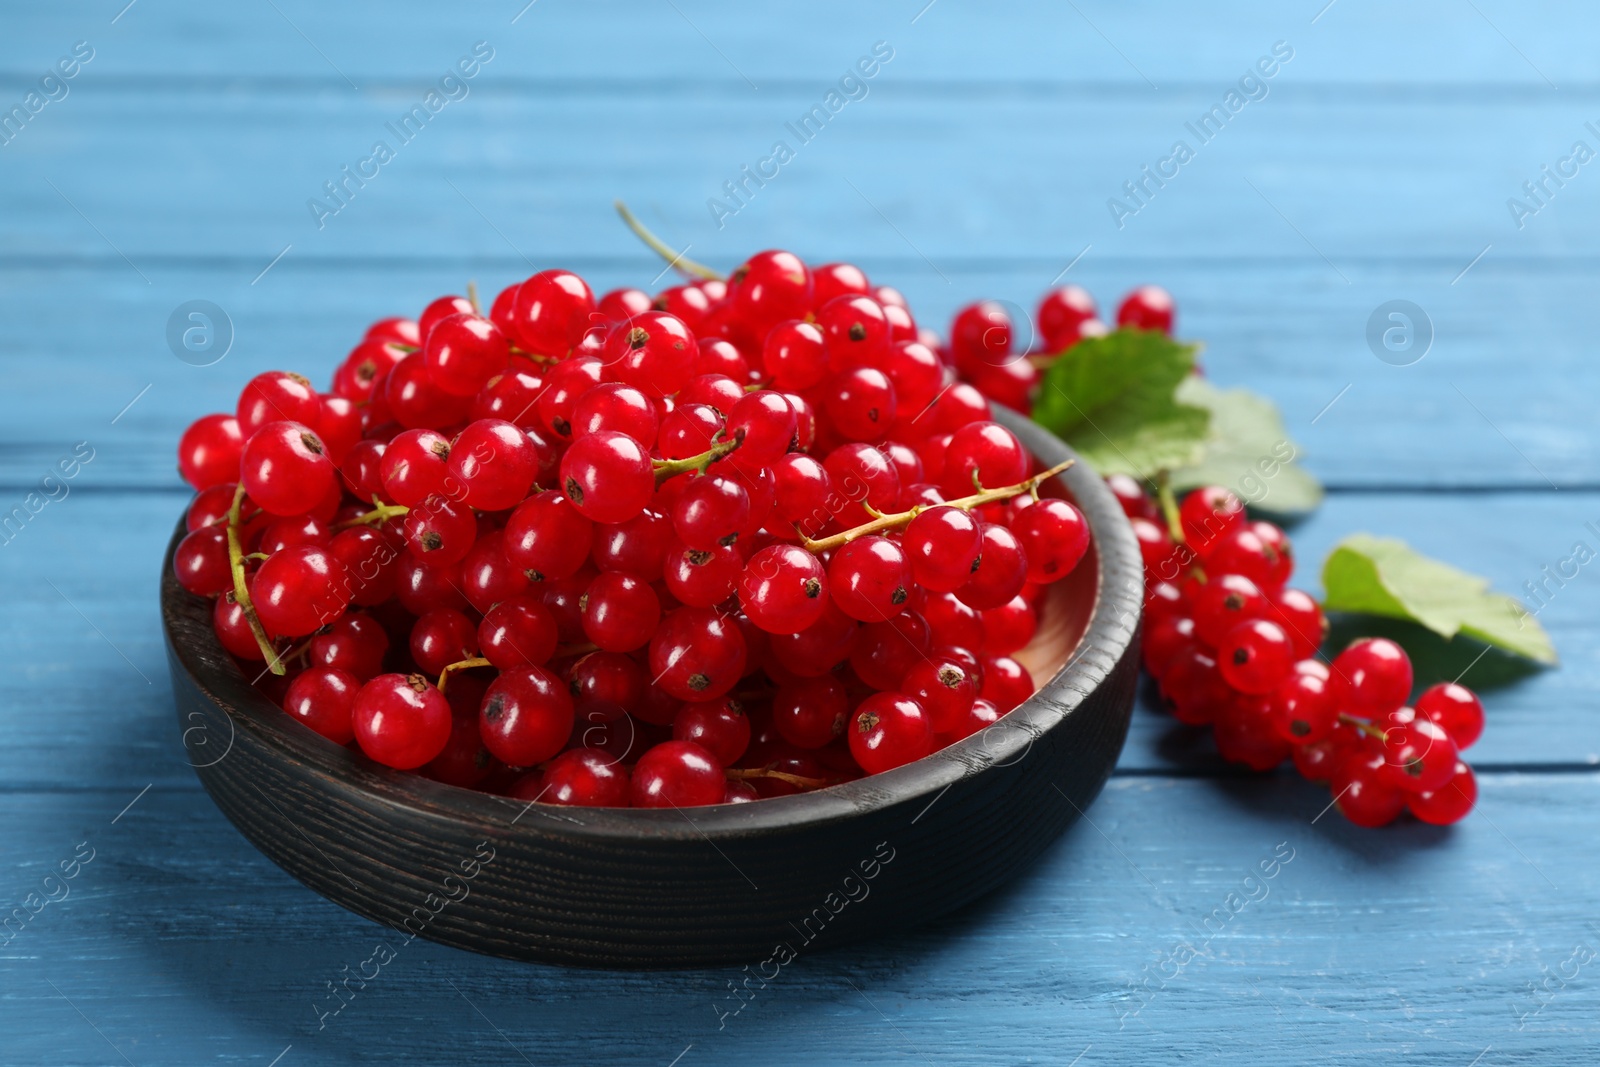 Photo of Delicious red currants on blue wooden table